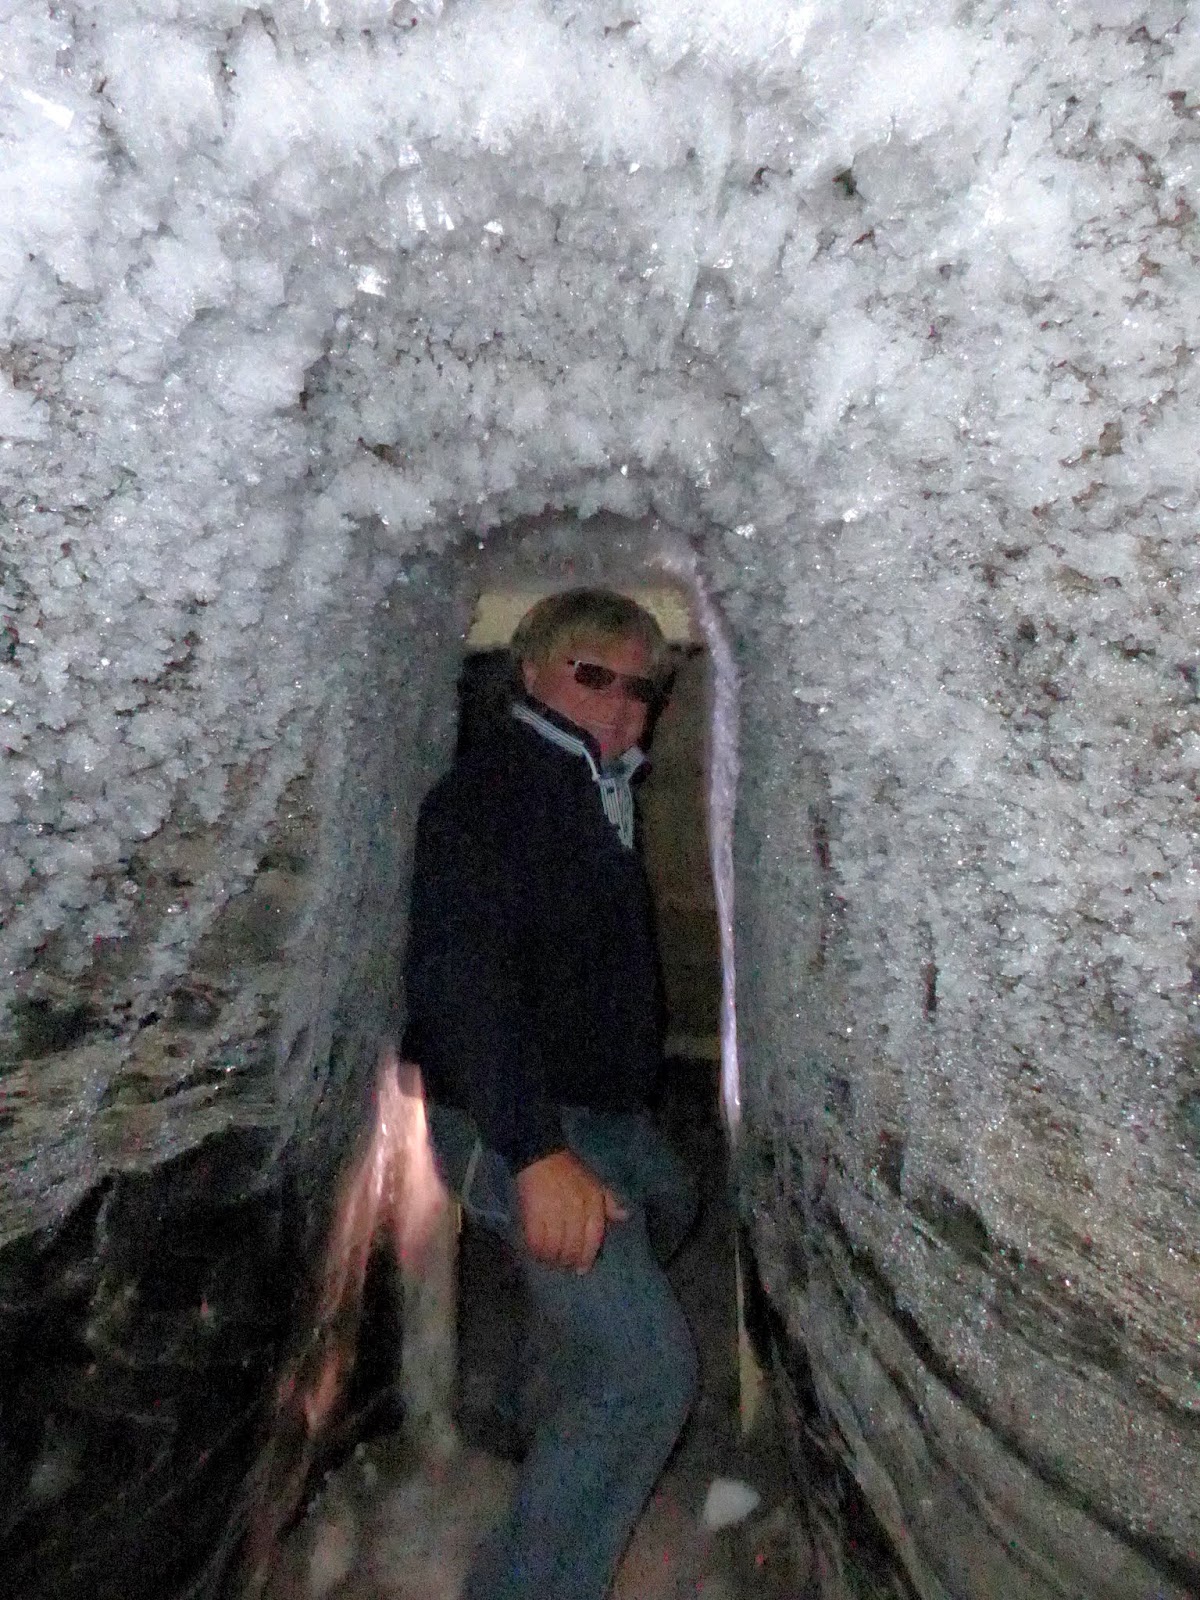 Anders has to  walk sideways to get in and out of the different areas in the ice house.